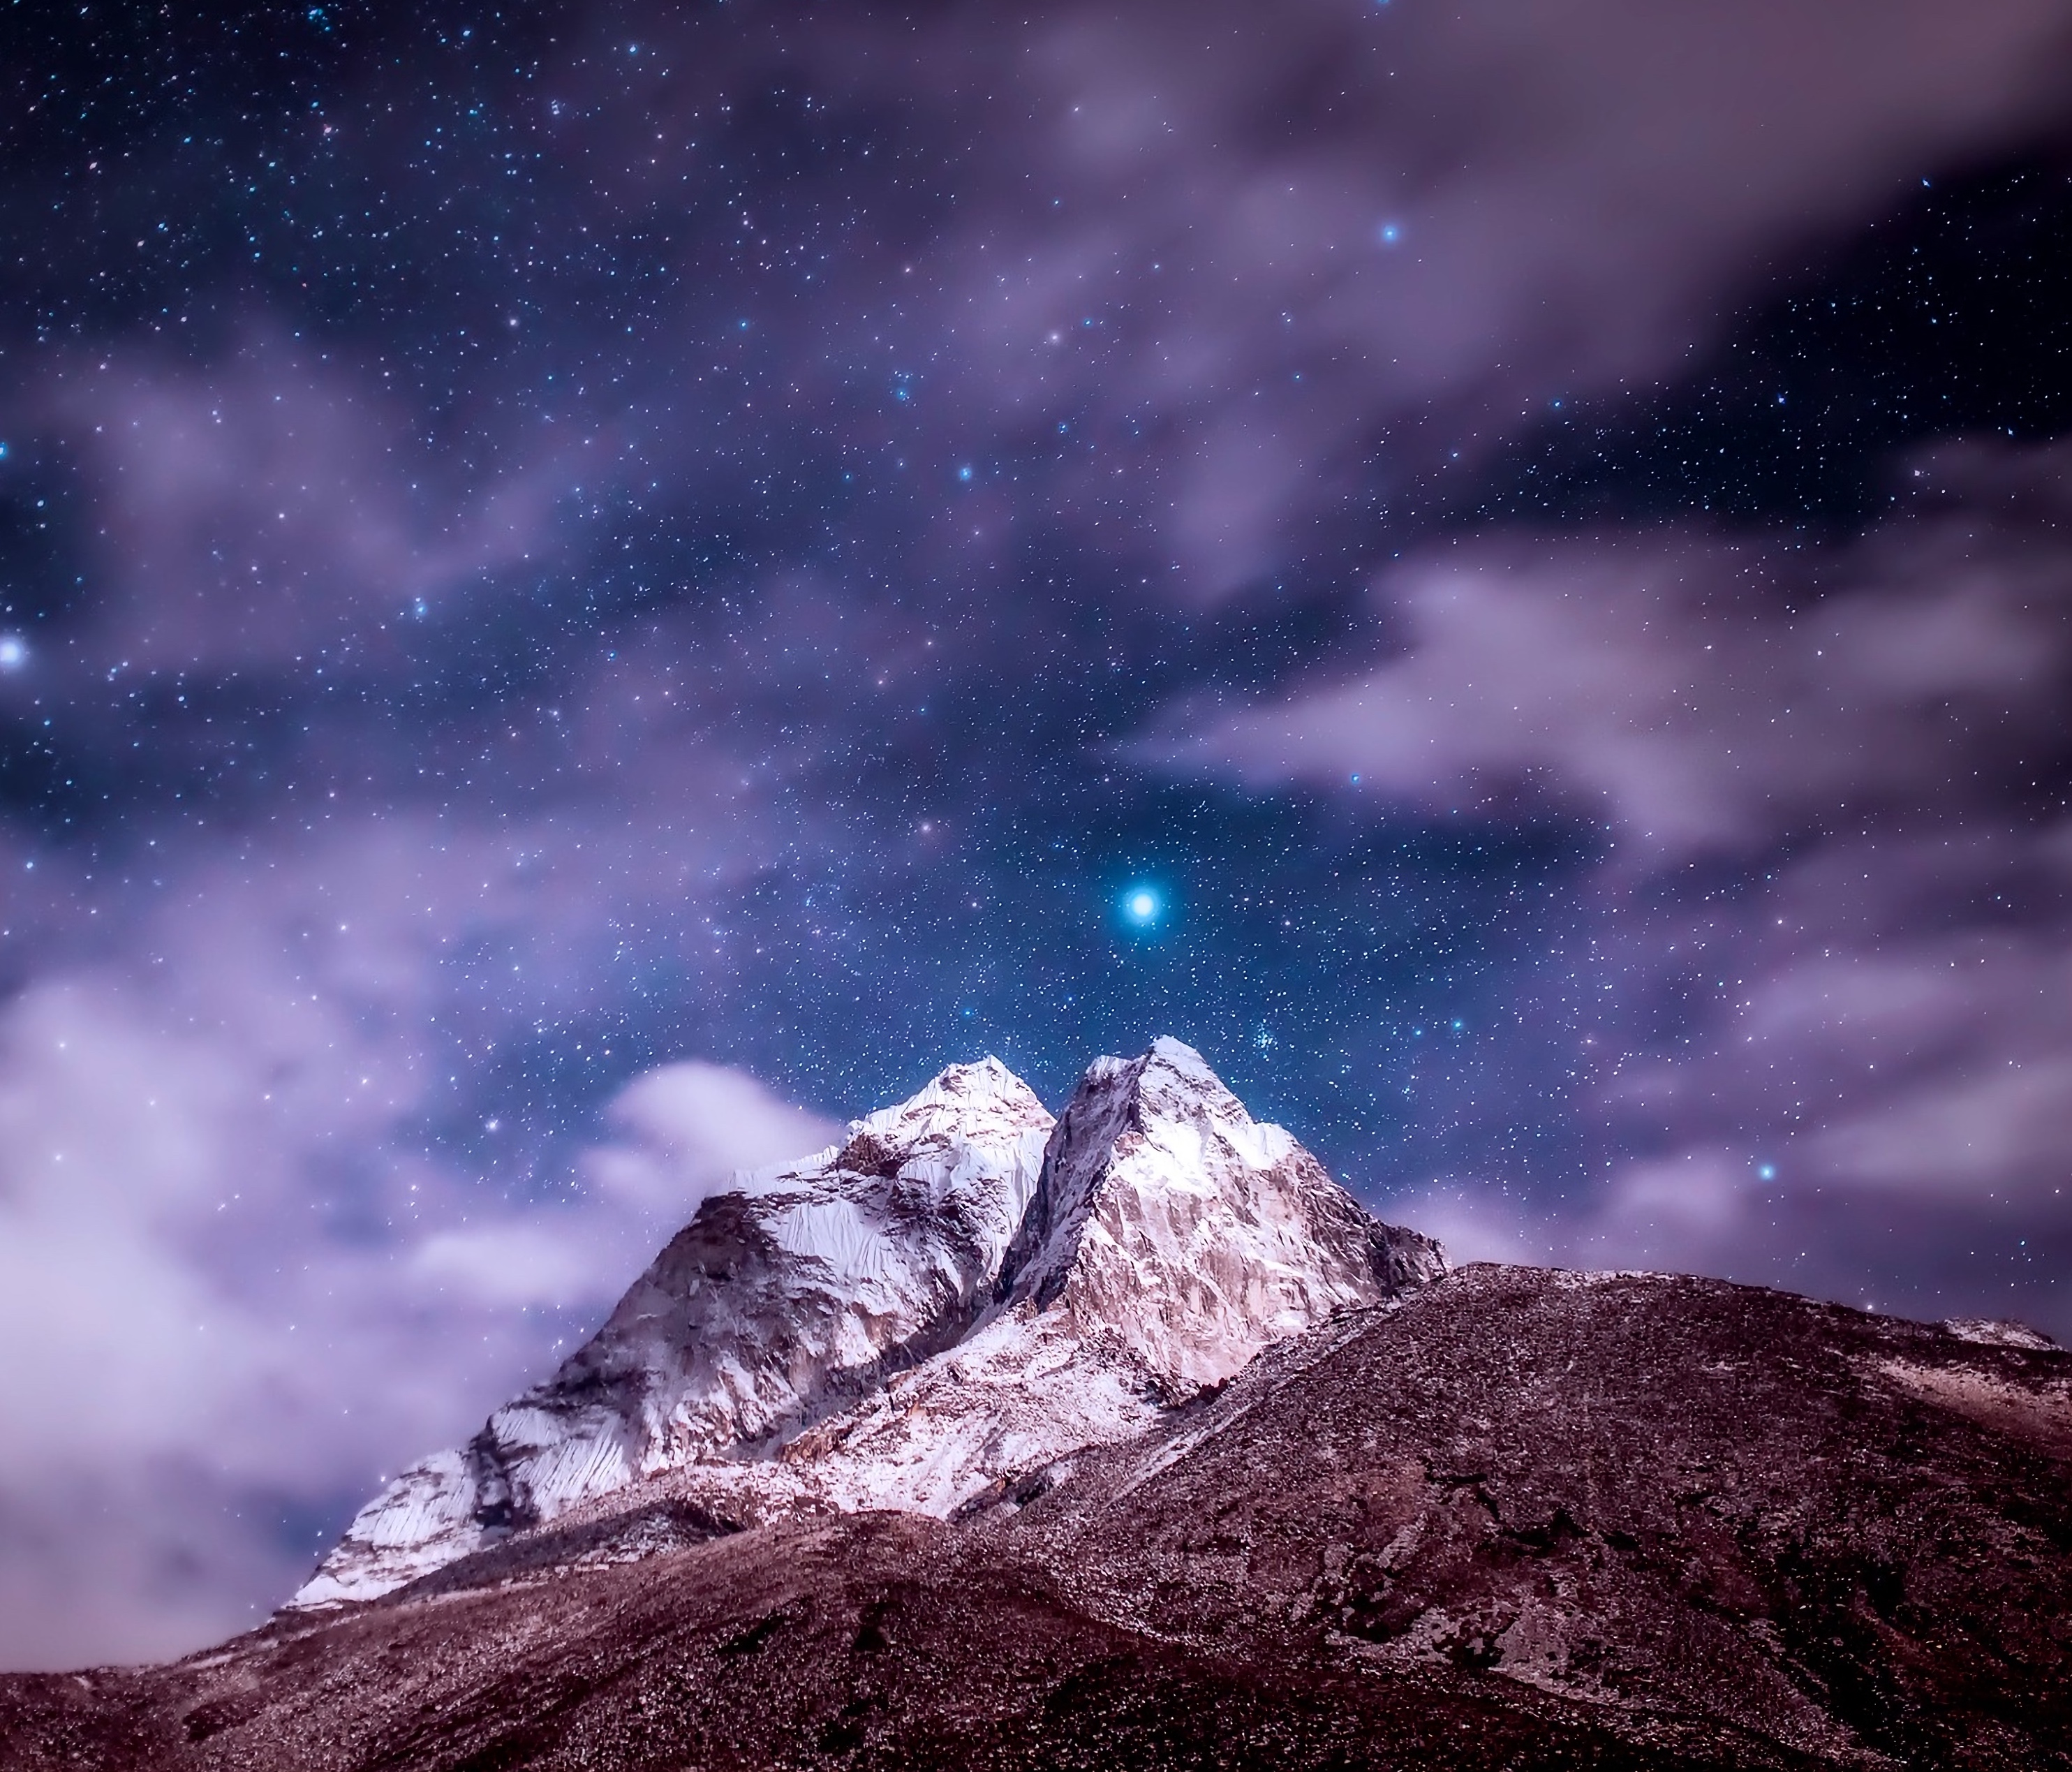 himalayas, starry sky, mountains, nature, clouds, vertex, top, snow covered, snowbound